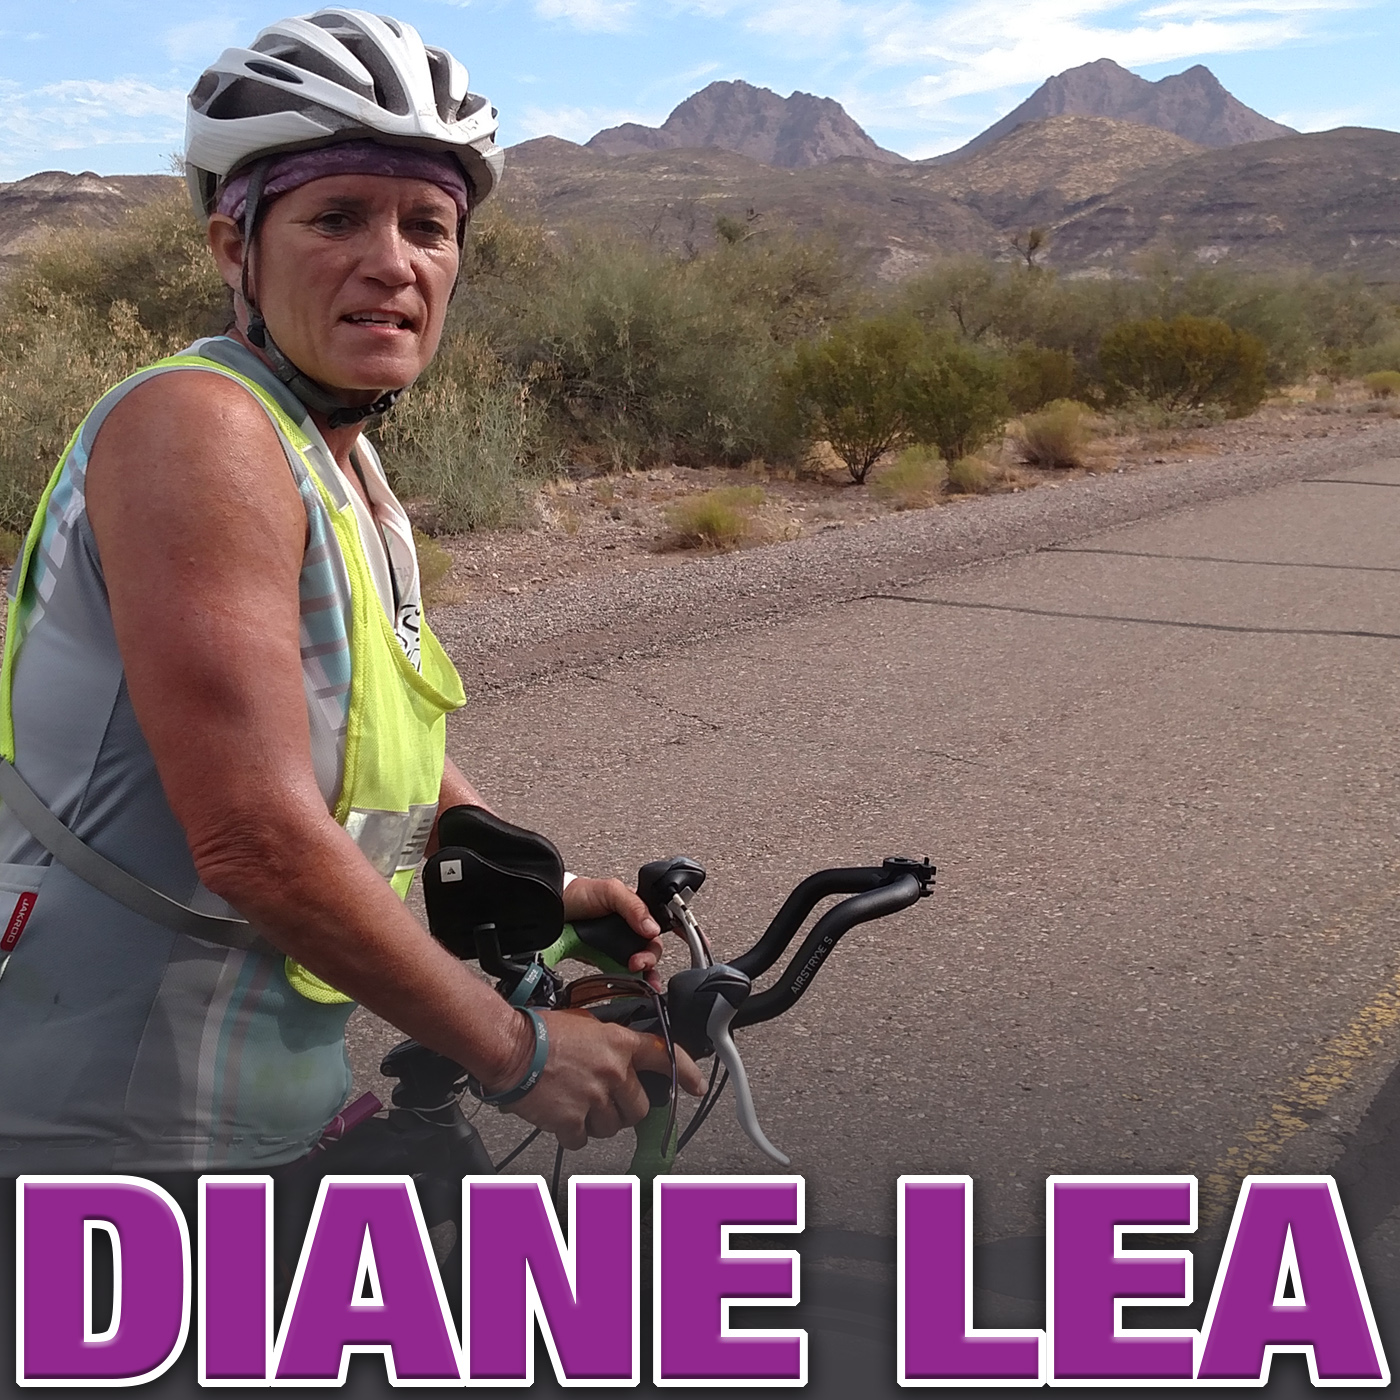 LIP 047: Making a Difference at 50 with Diane Lea